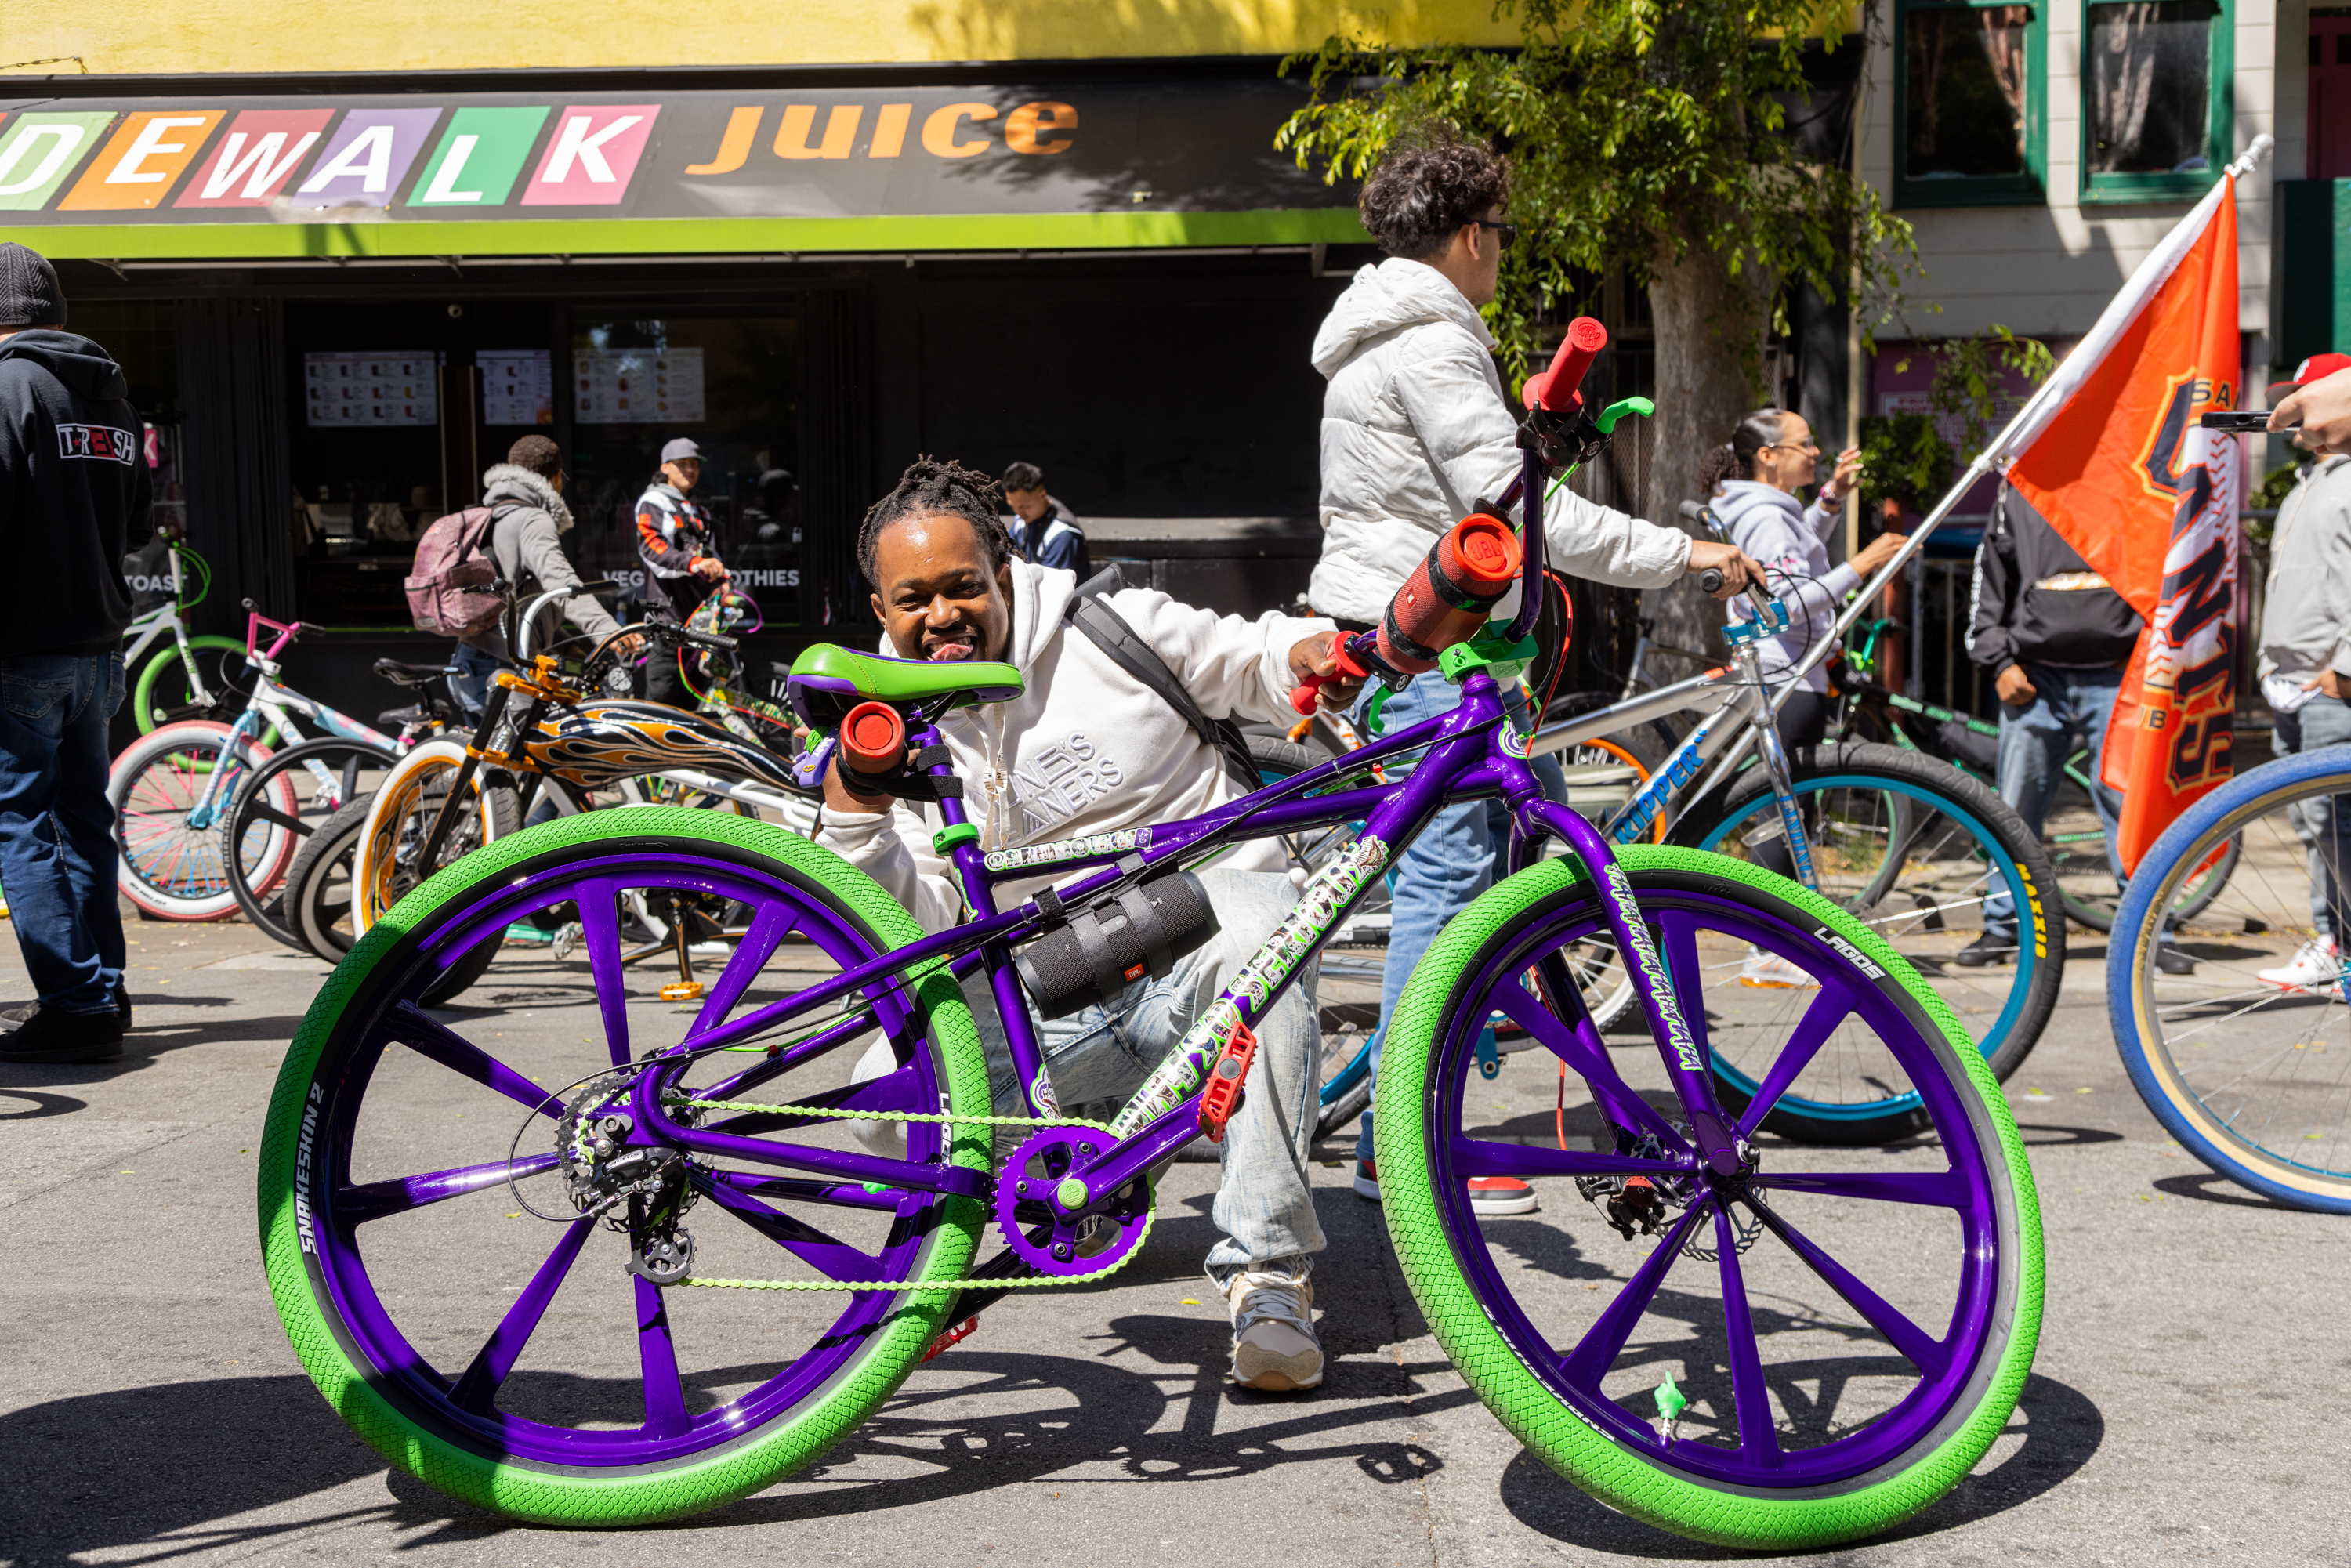 A person smiles behind a custom bike with purple frame and green wheels on a sunny street with onlookers and bikes.